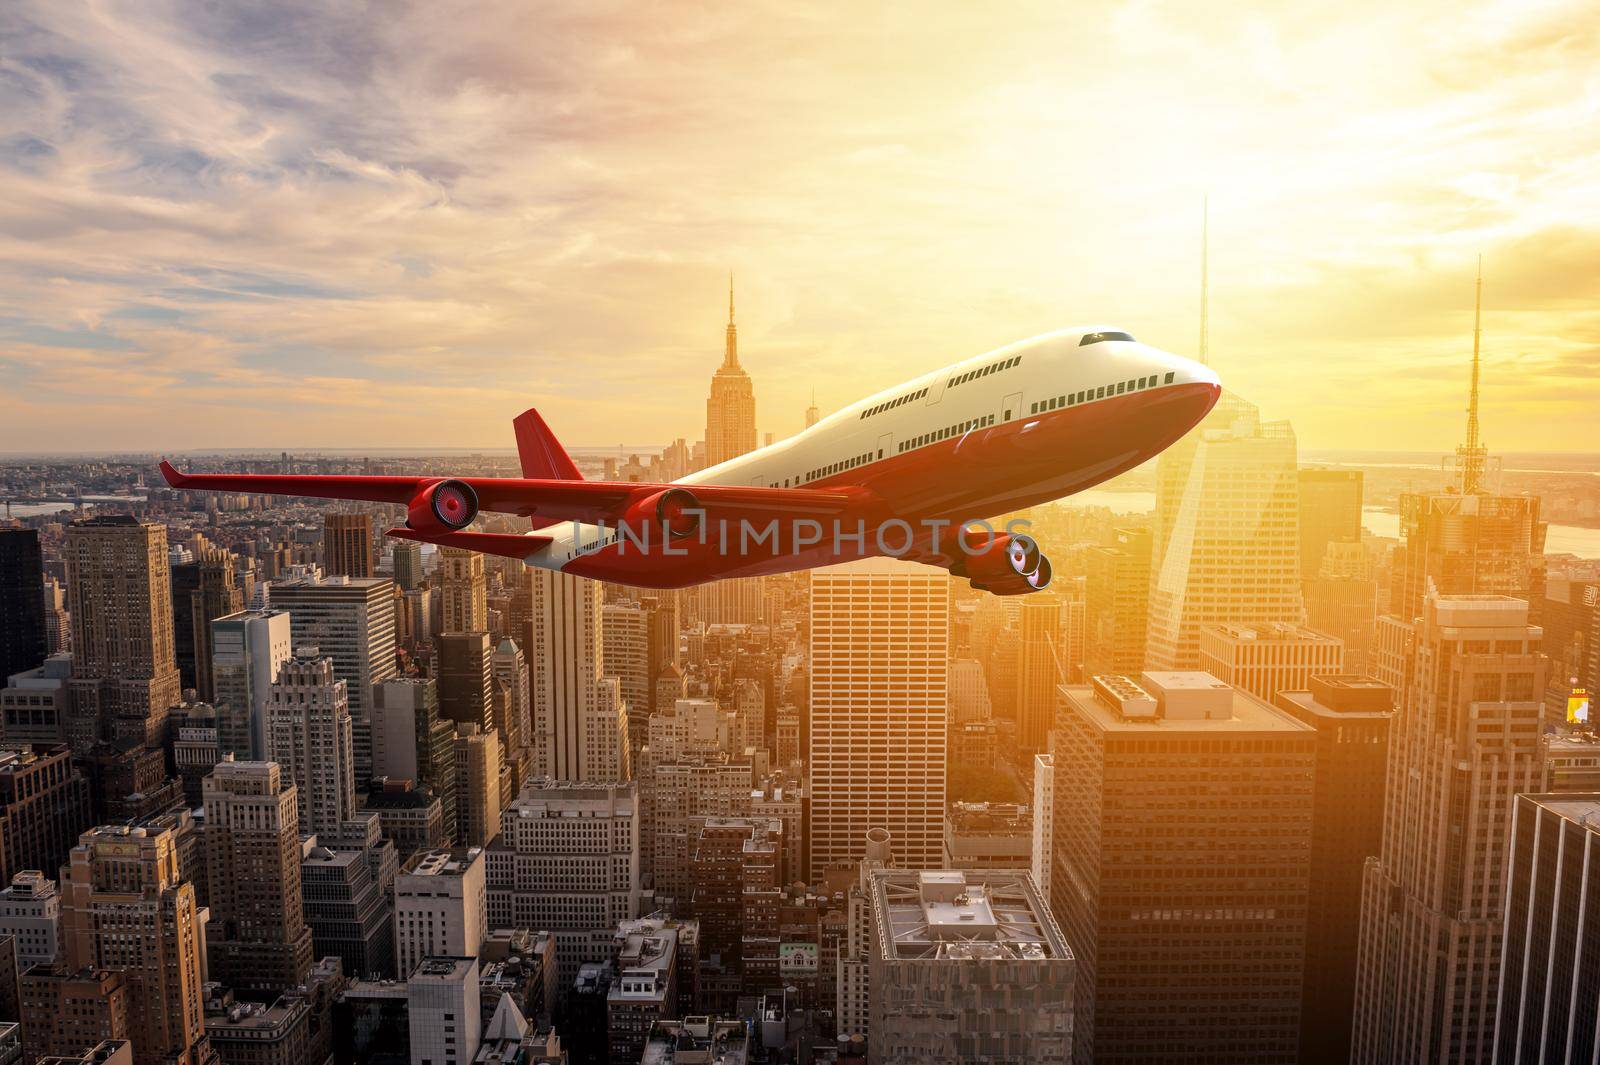 Airplane flying over a metropoly: 3D illustration